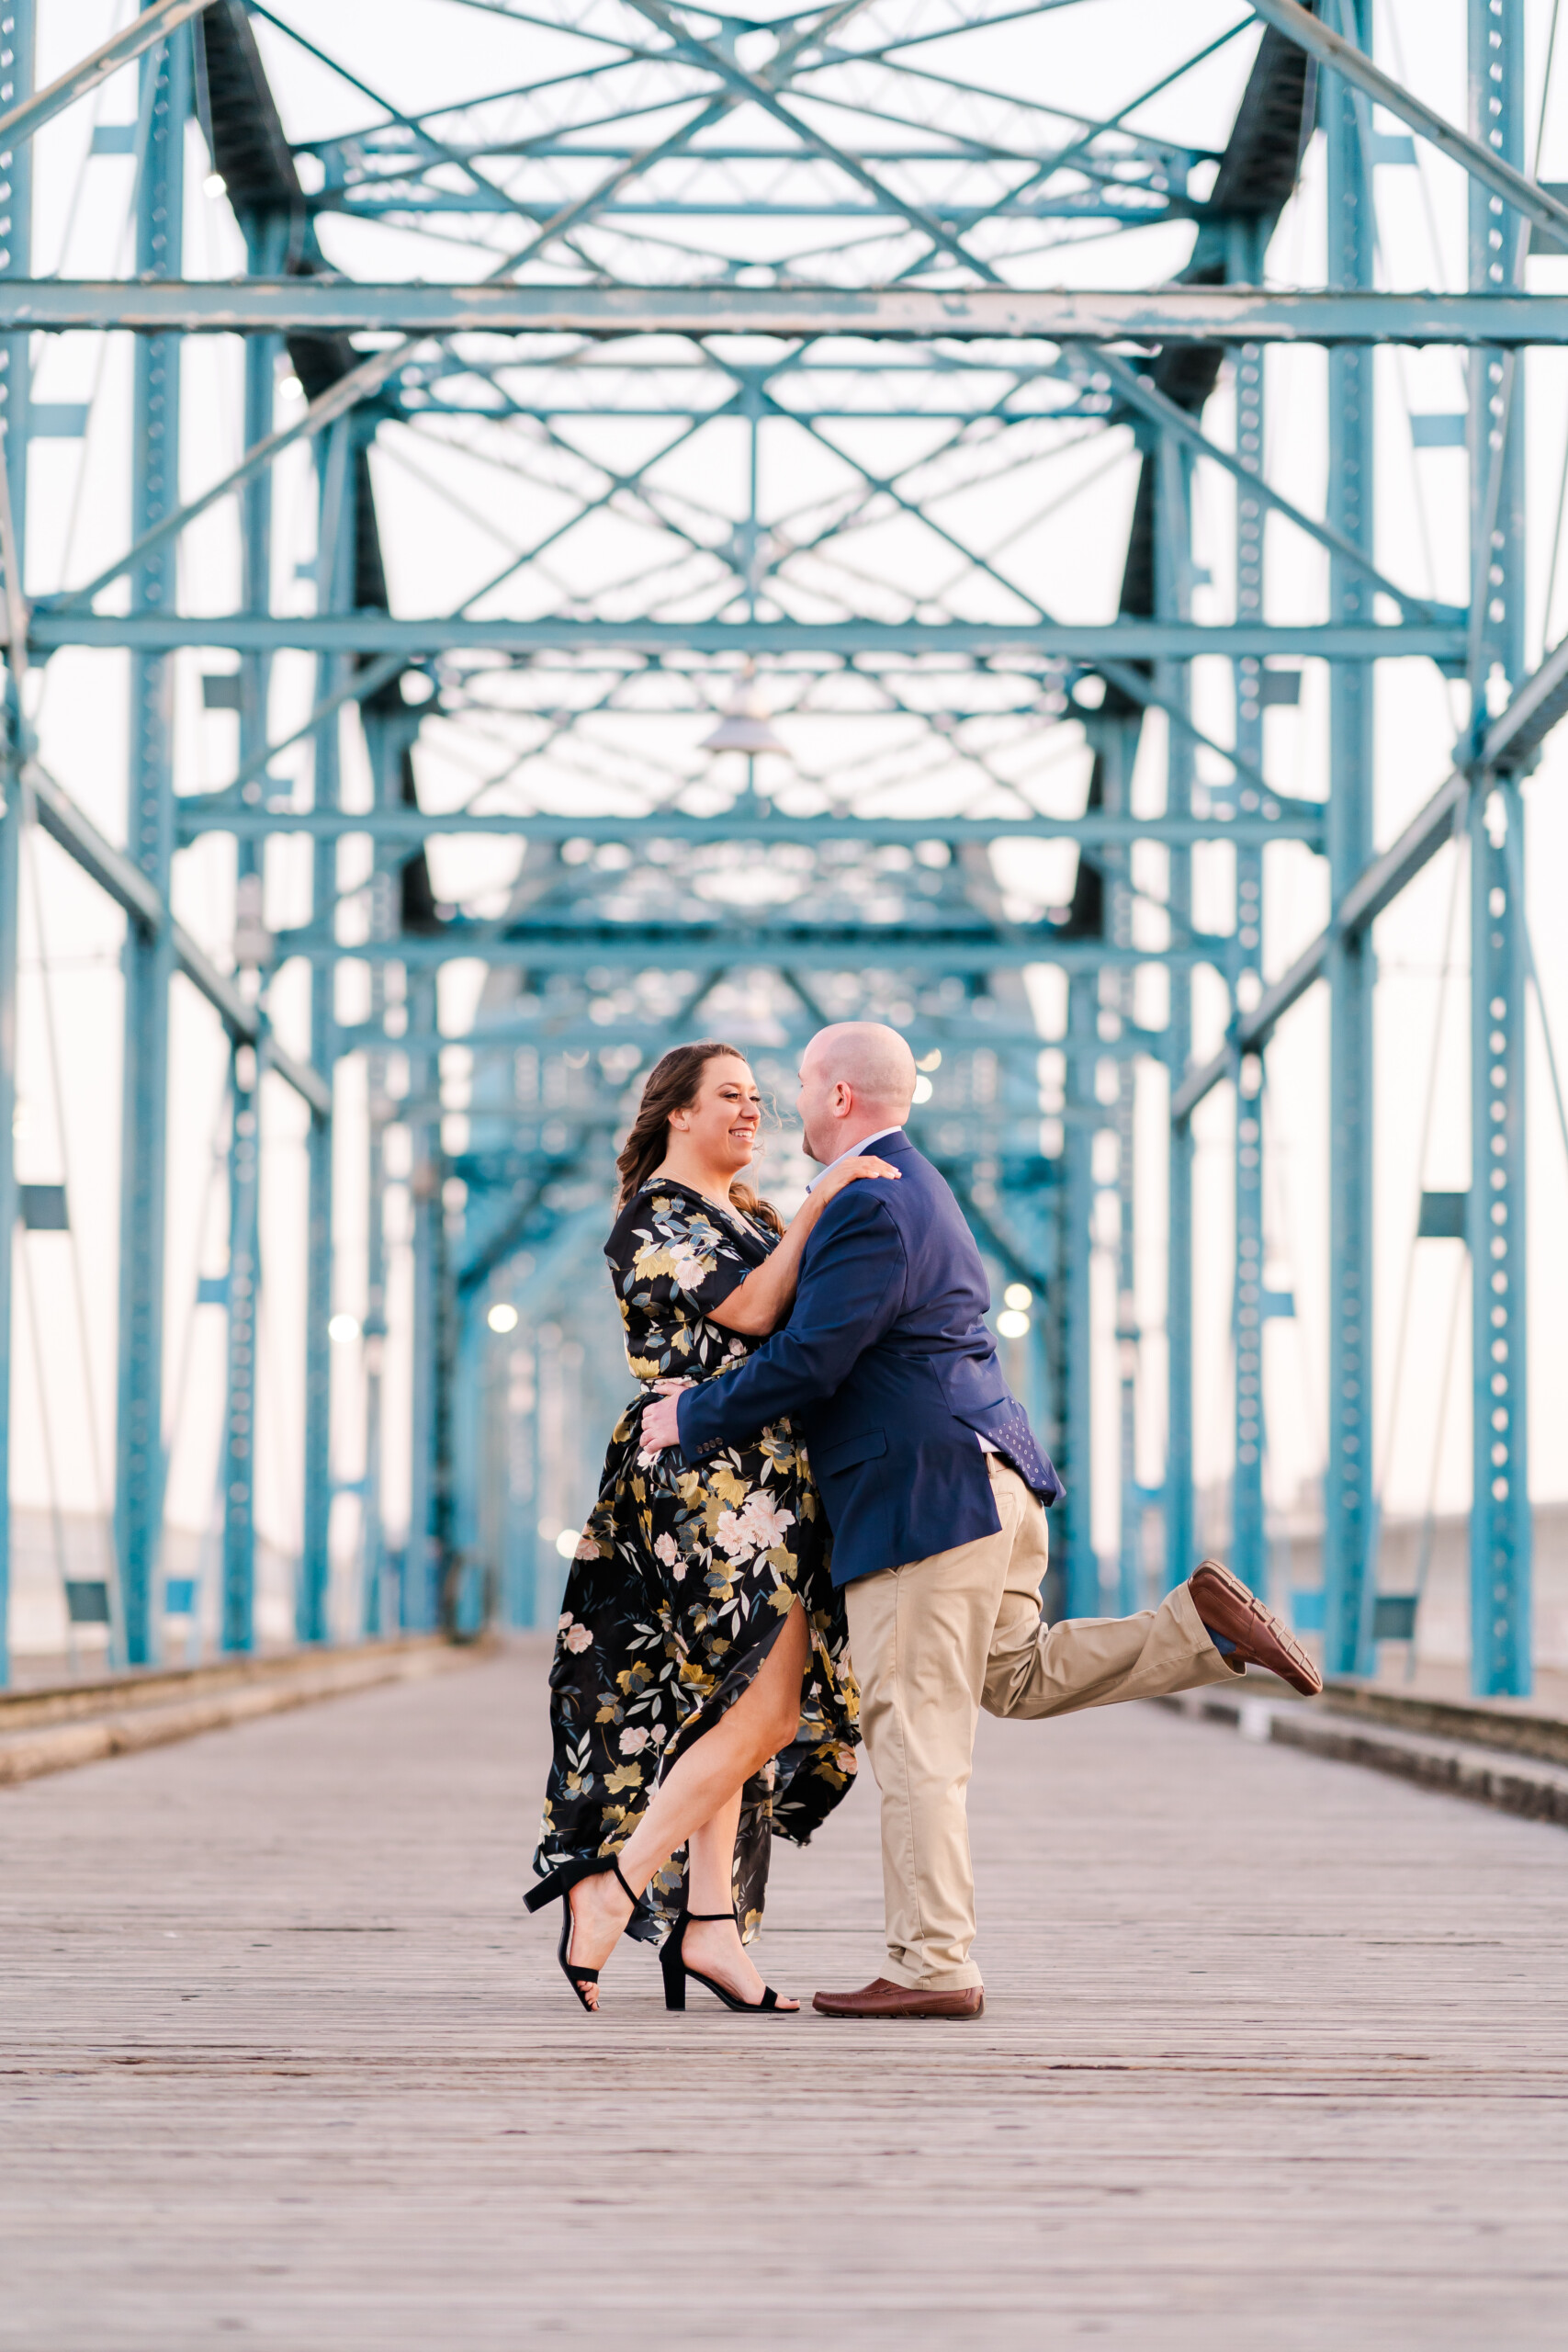 Downtown Chattanooga Couple Engaged